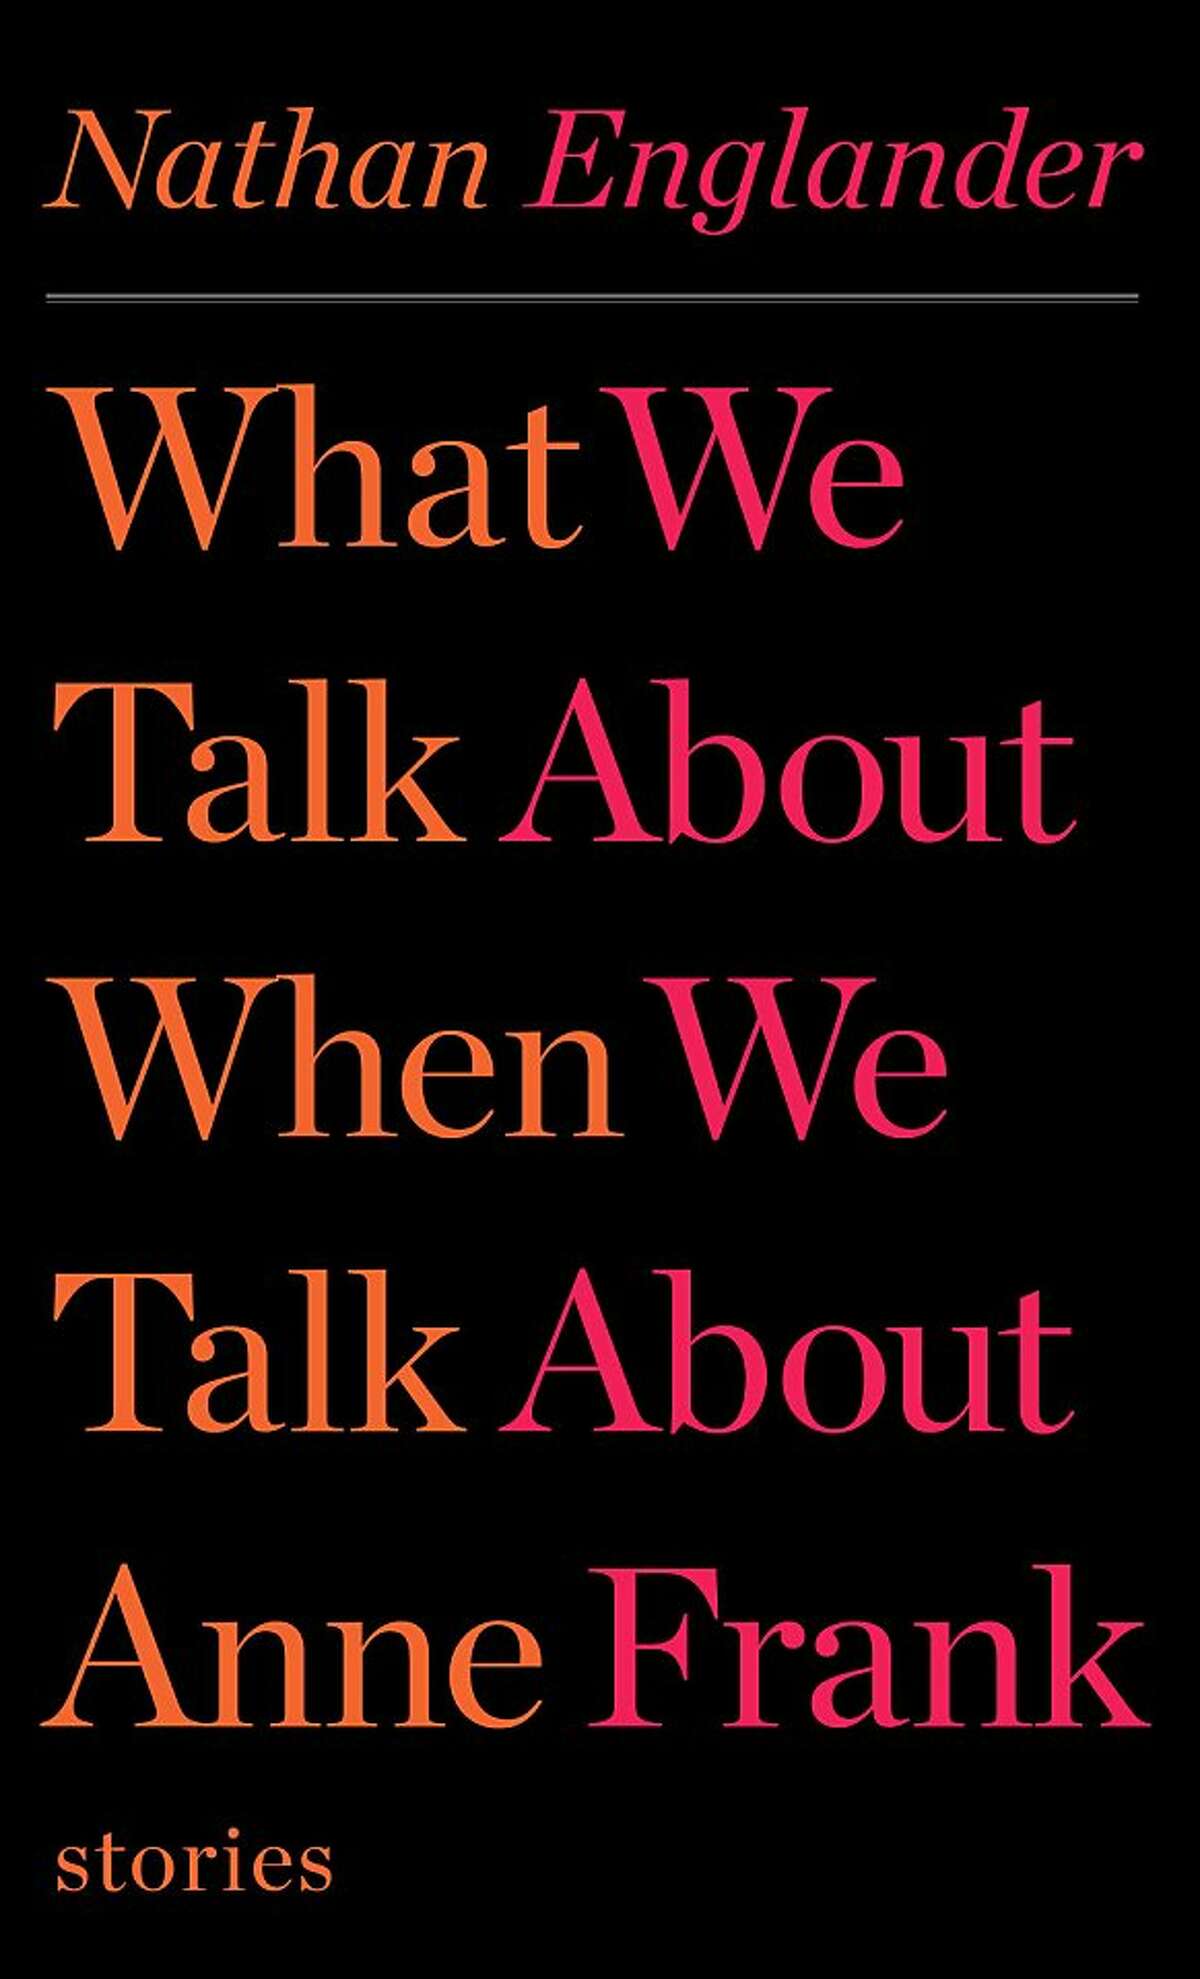 "What We Talk About When We Talk About Anne Frank Stories" By Nathan Englander